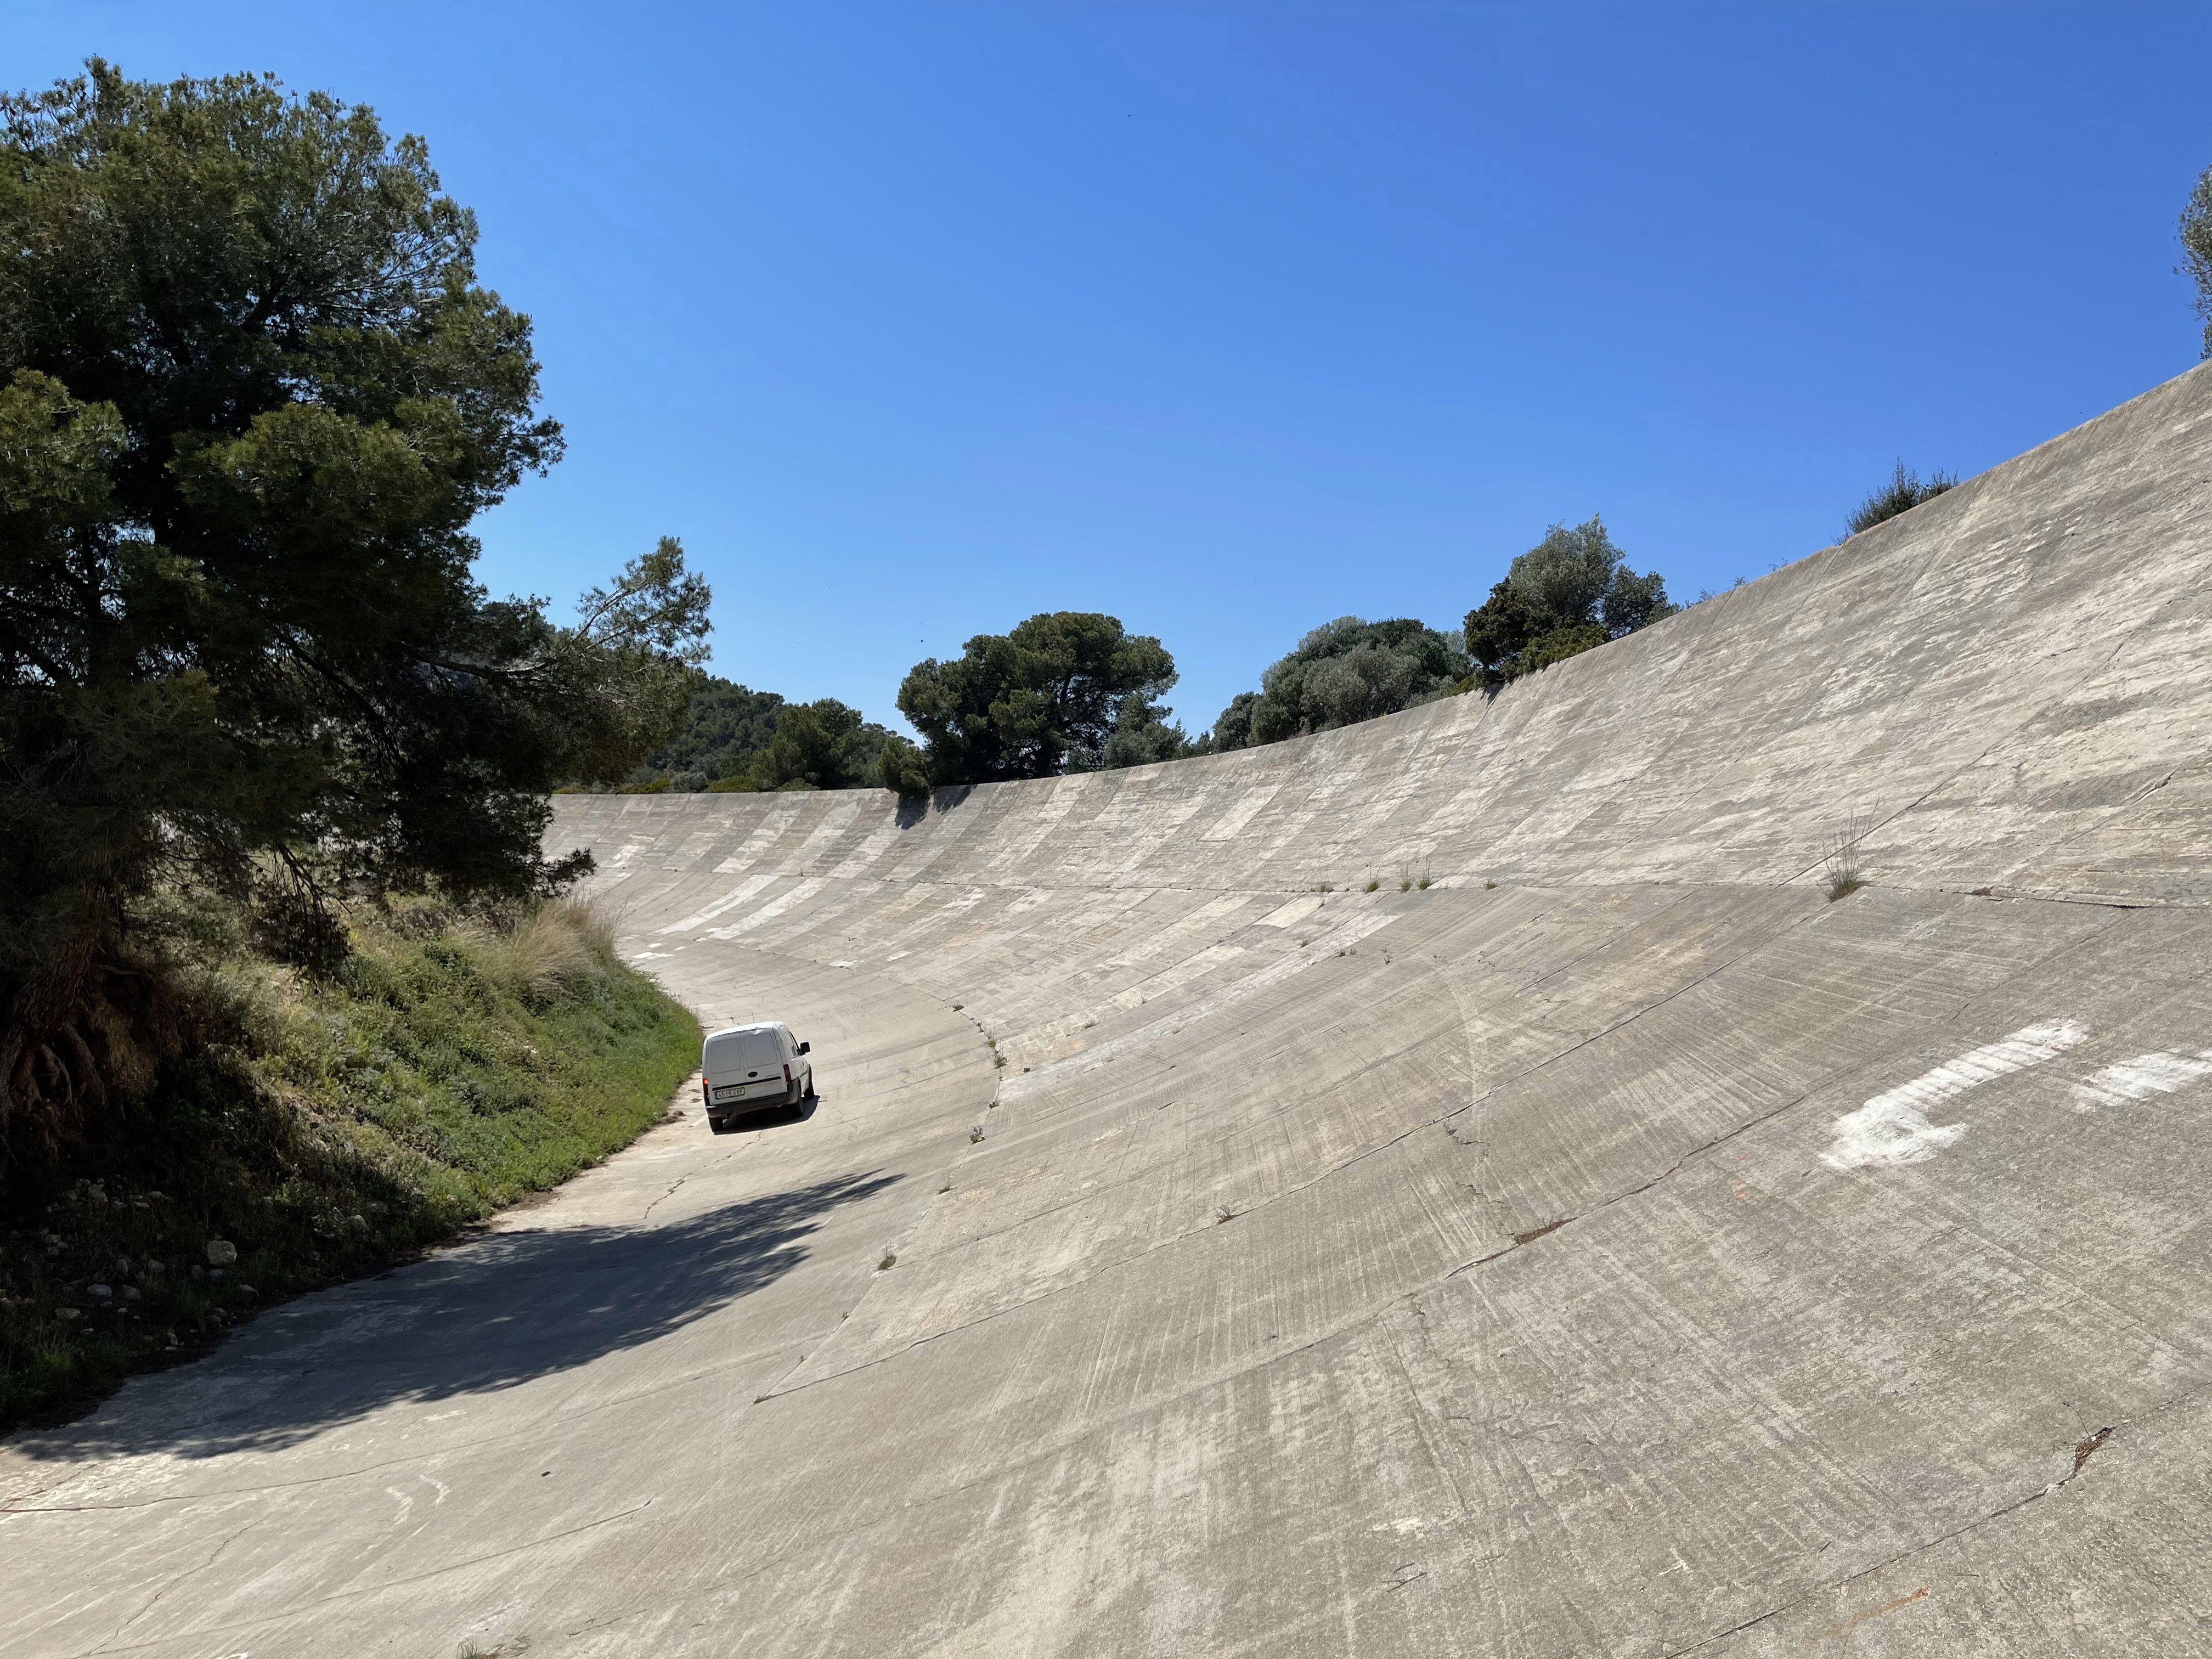 60 Degree Banking At Sitges Terramar Circuit In Spain Has To Be Seen To Be Believed